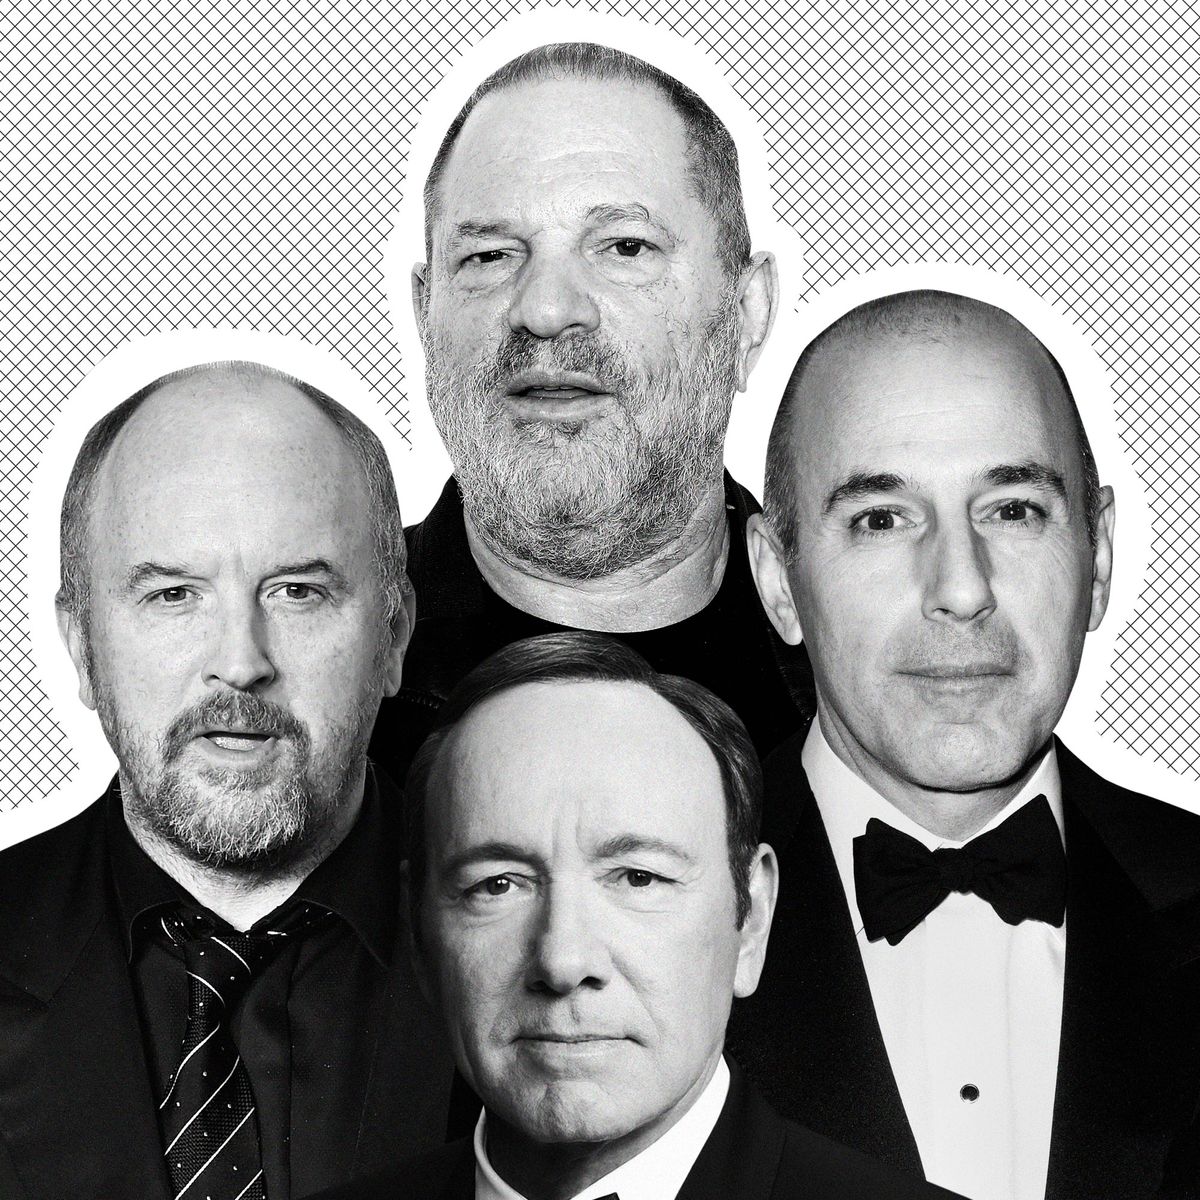 A Year In Sexual Harassment Since The Weinstein Allegations